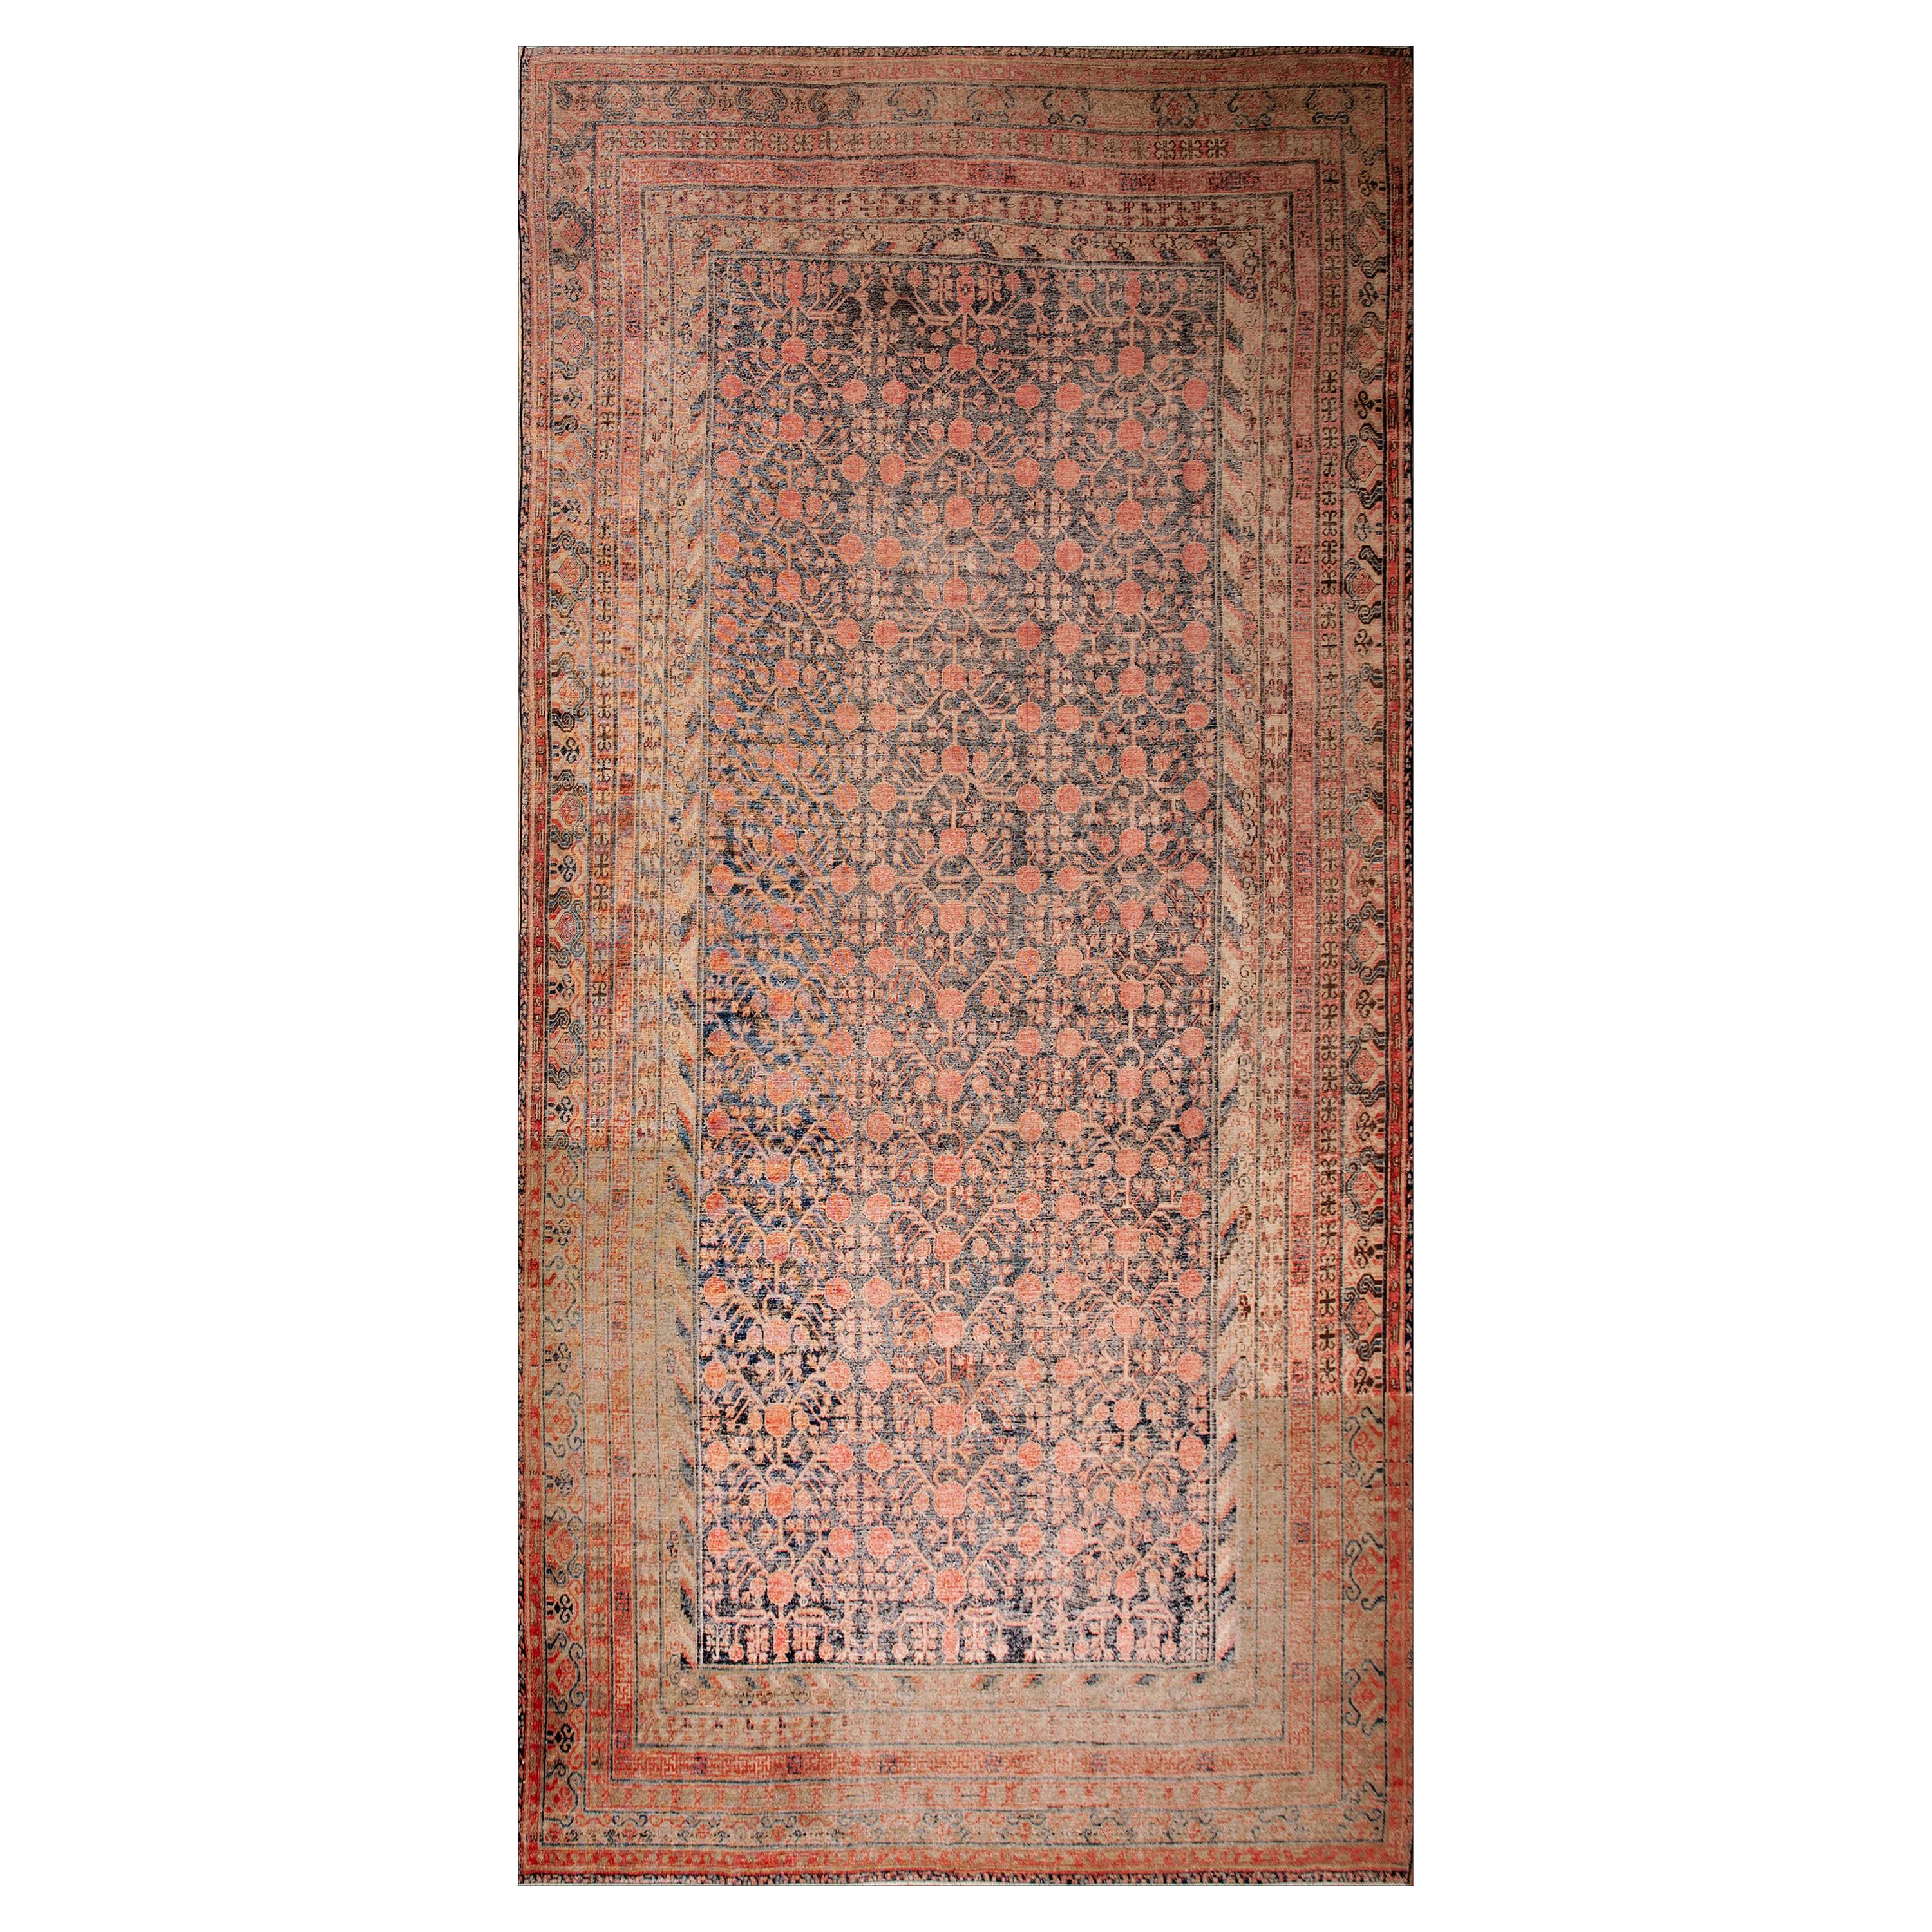 Early 20th Century Central Asian Khotan Carpet ( 9' x 17' 6" - 275 x 533 ) For Sale